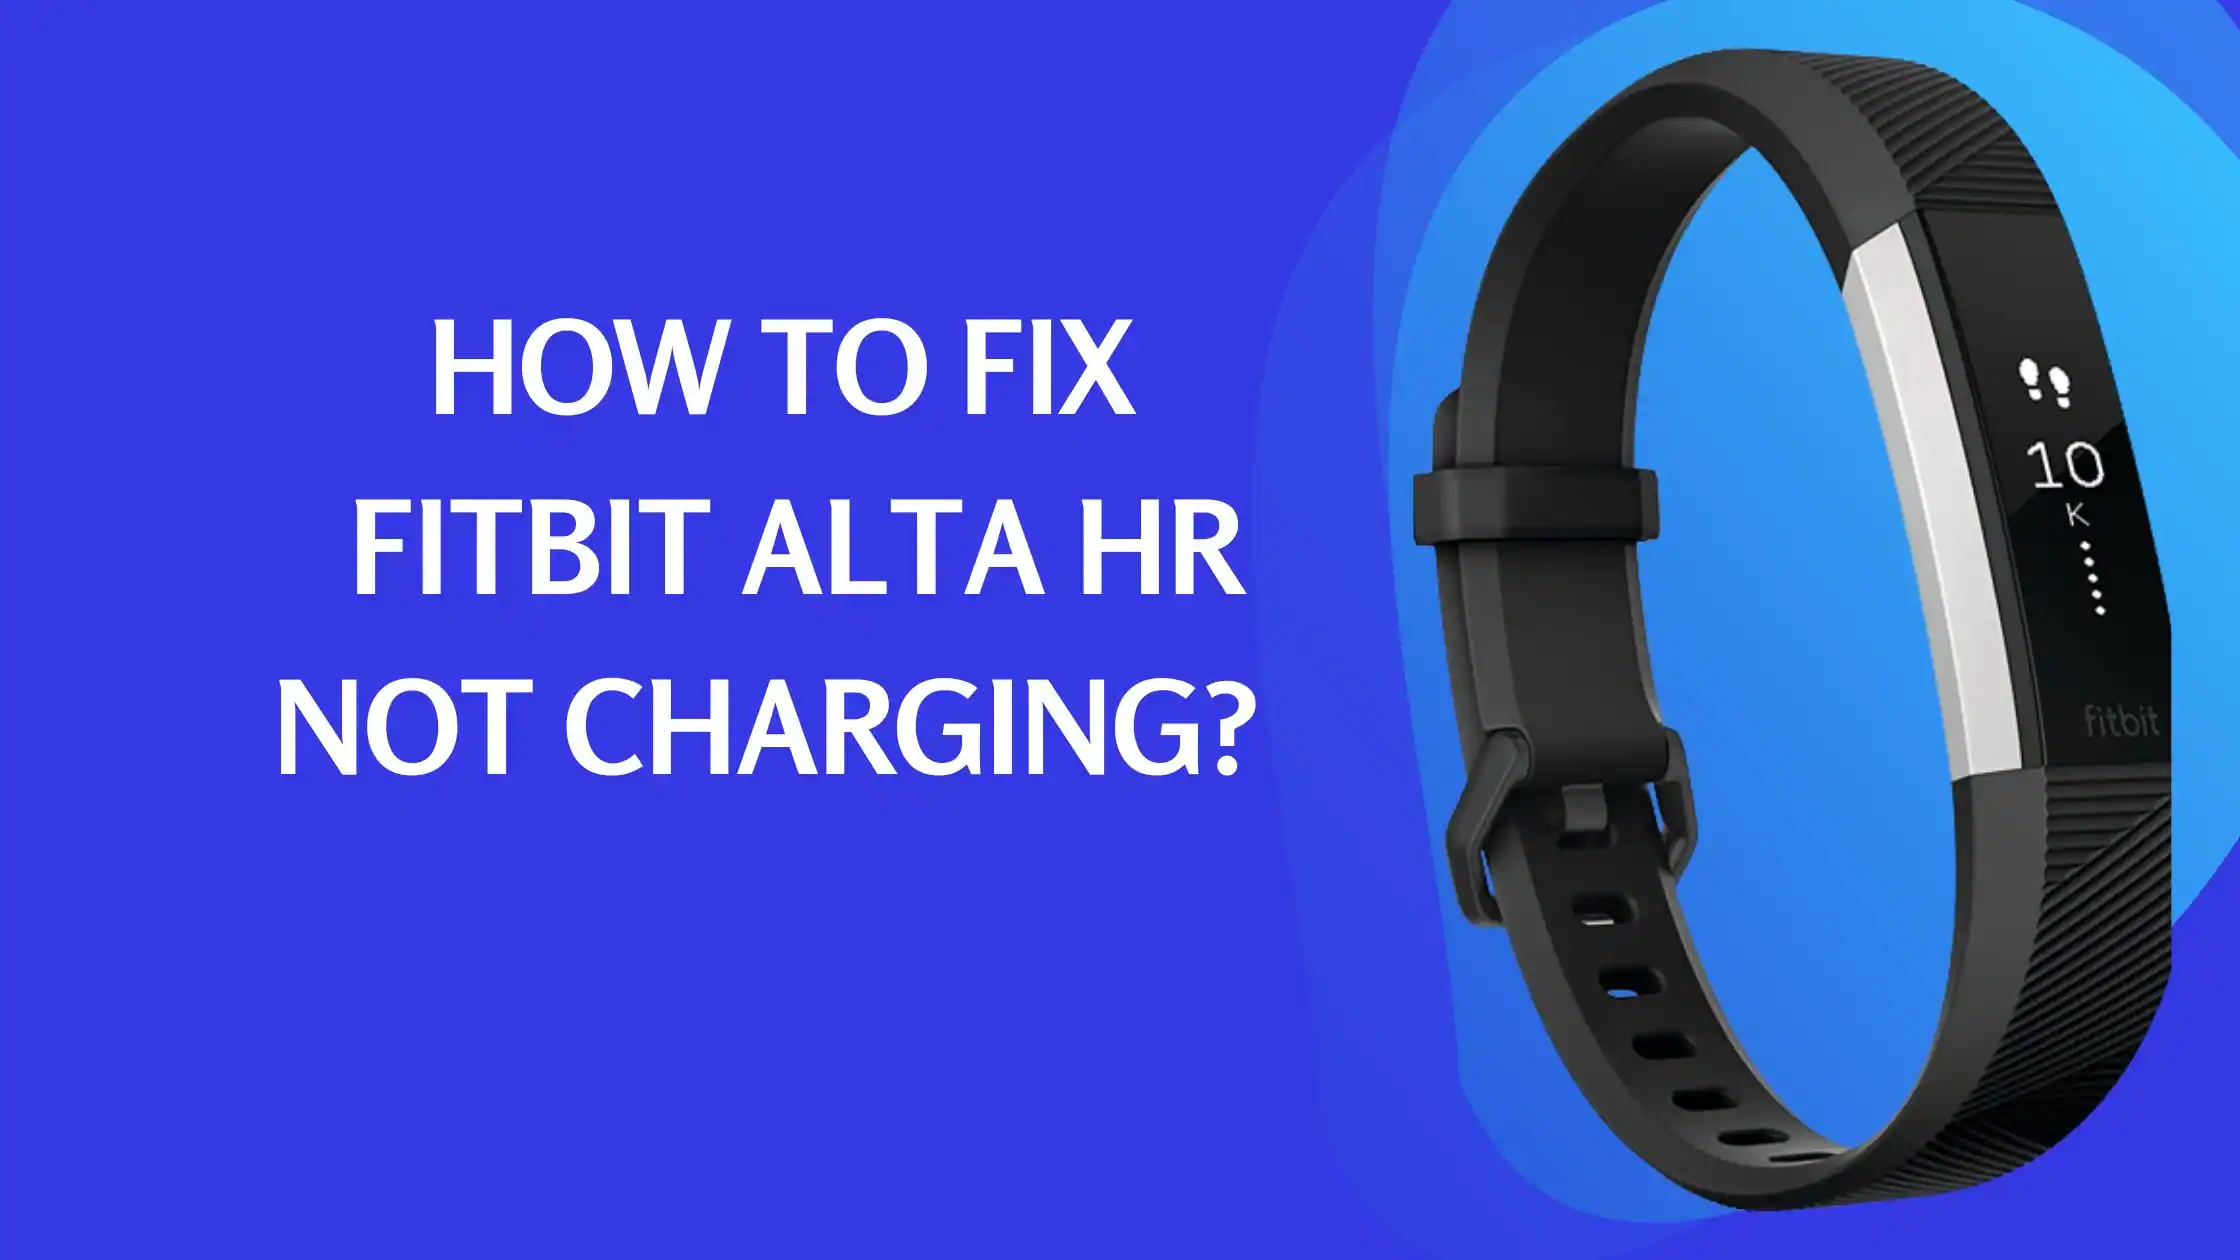 Fitbit Alta HR Not Charging how to fix